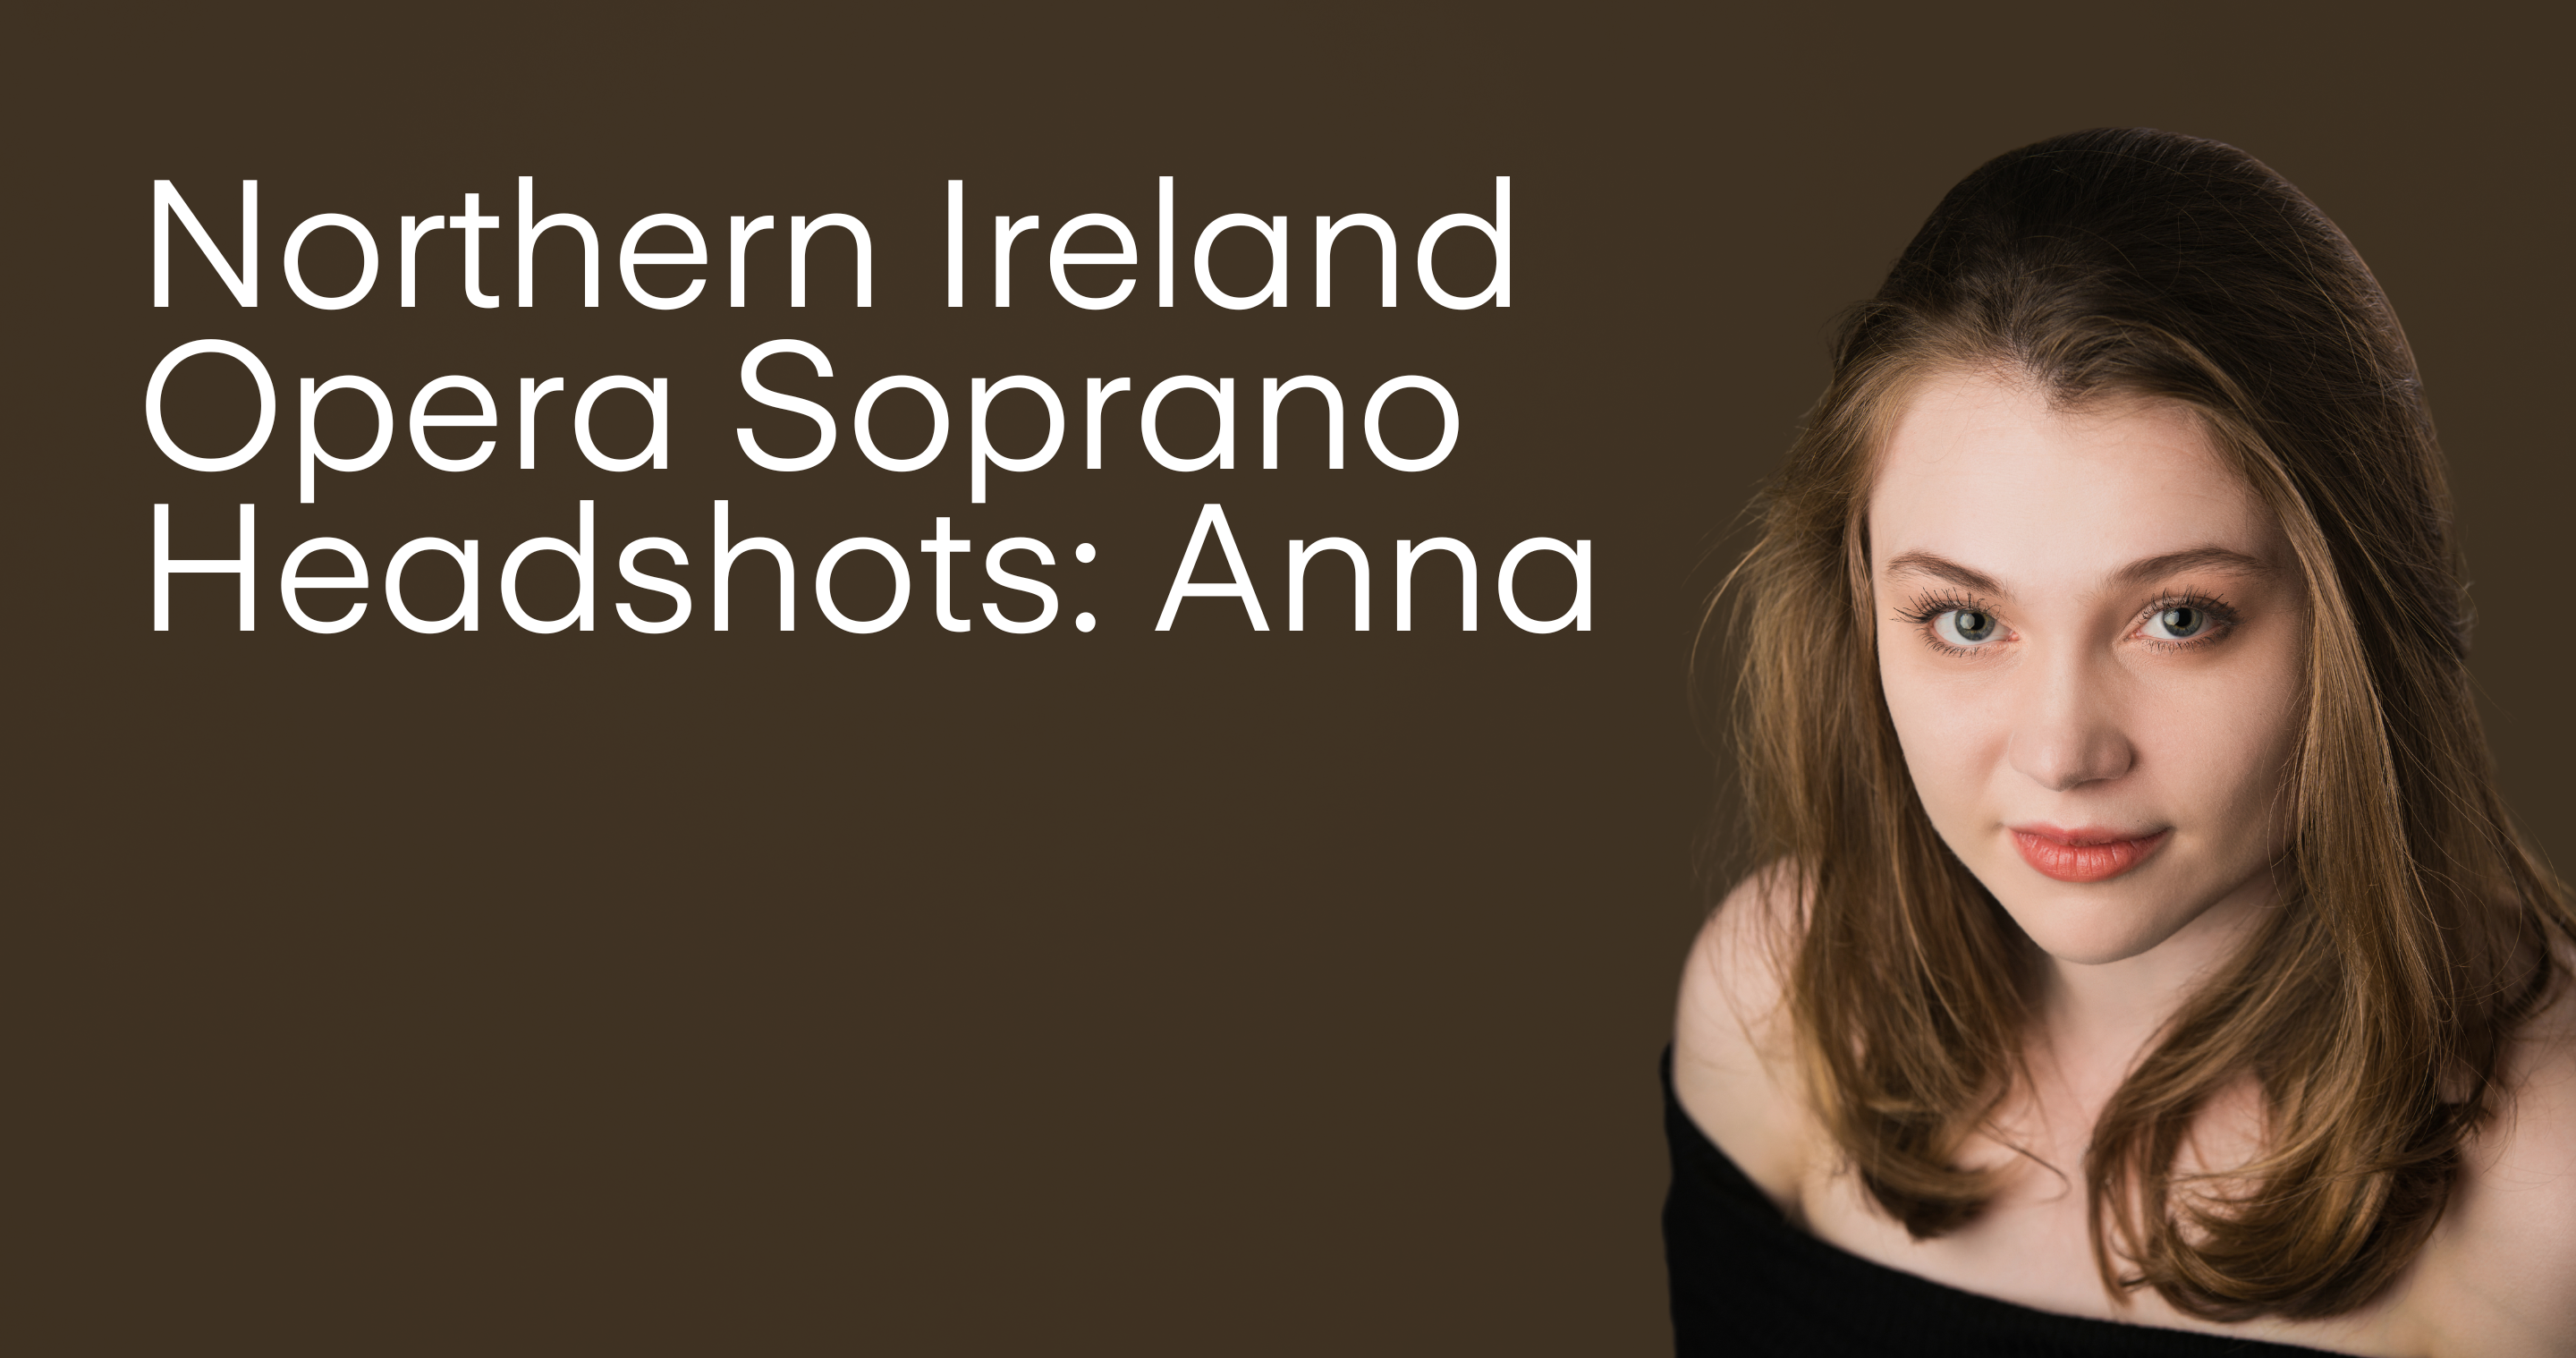 A Professional headshot photograph taken by Northern Ireland's top headshot photographer in Belfast of a girl from northern Ireland Opera